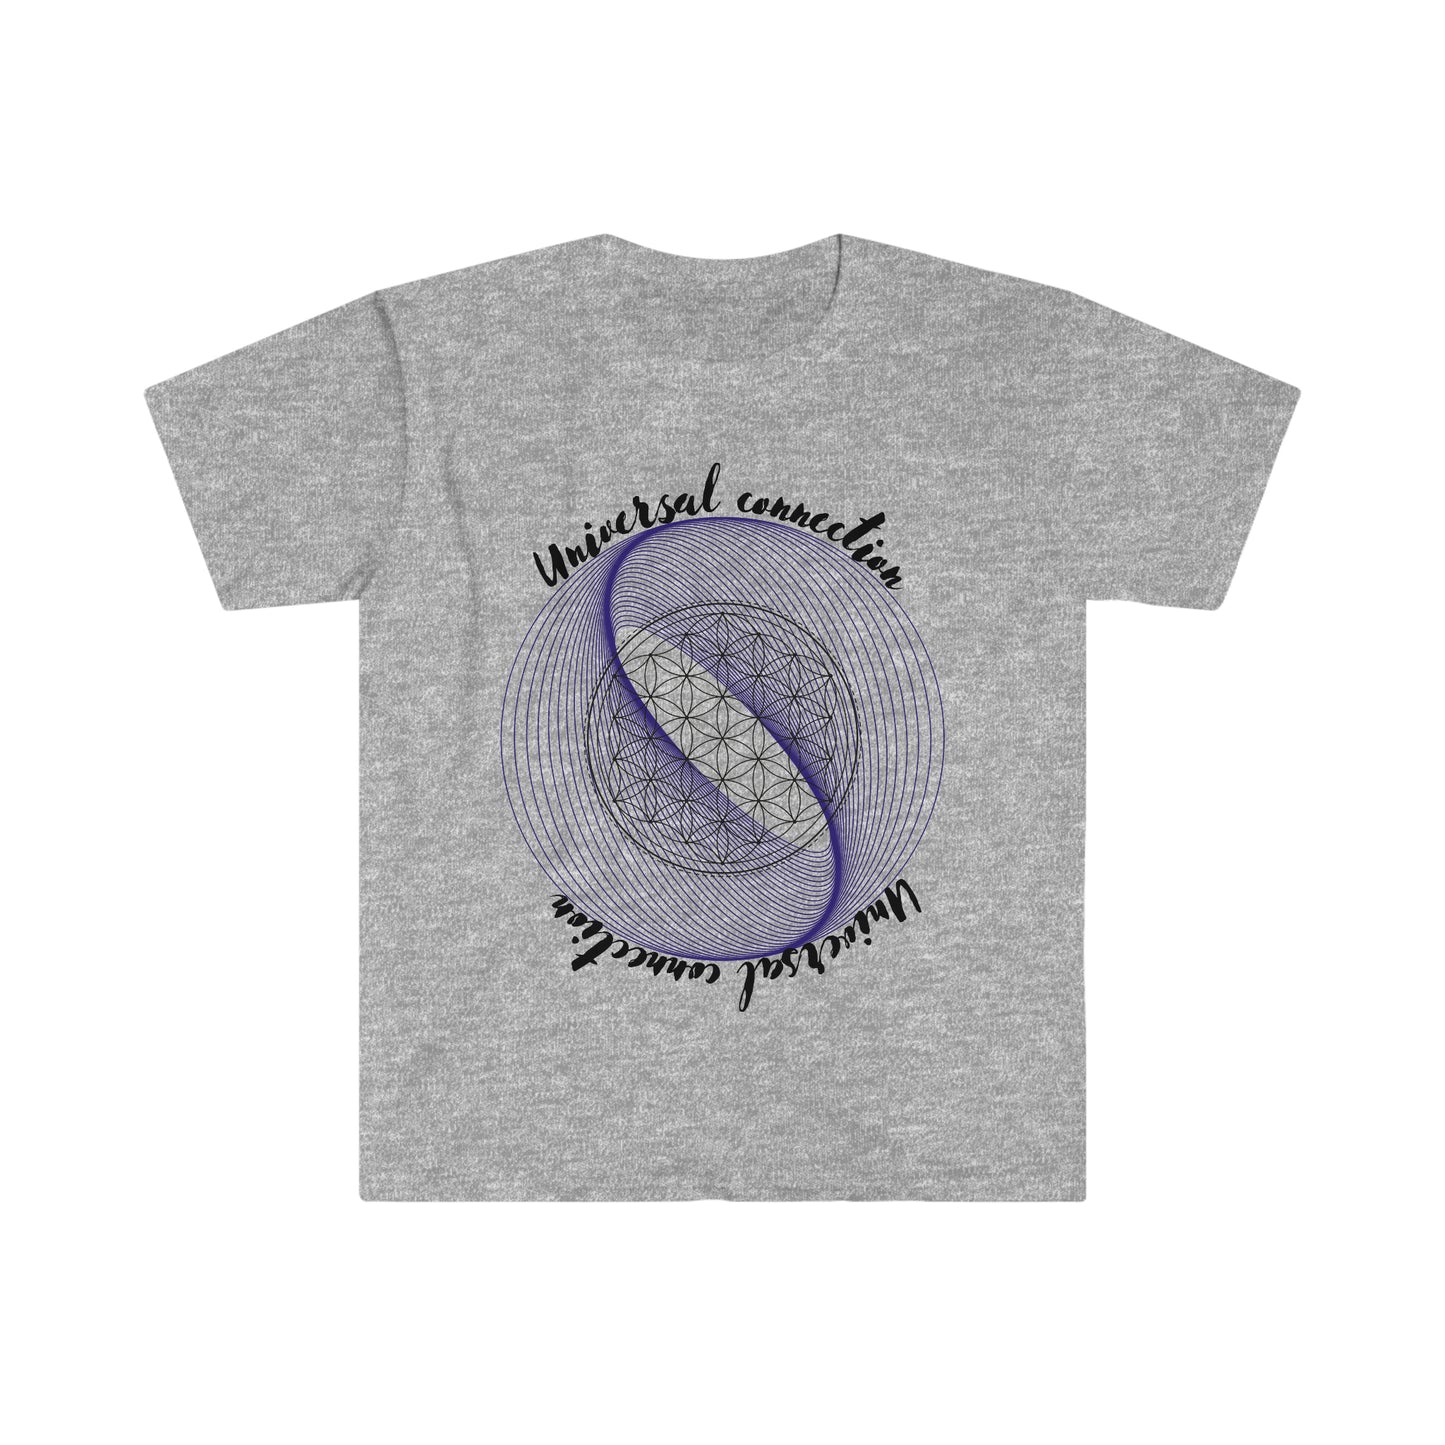 Universal Connection! Inspirational tee. 100% soft cotton